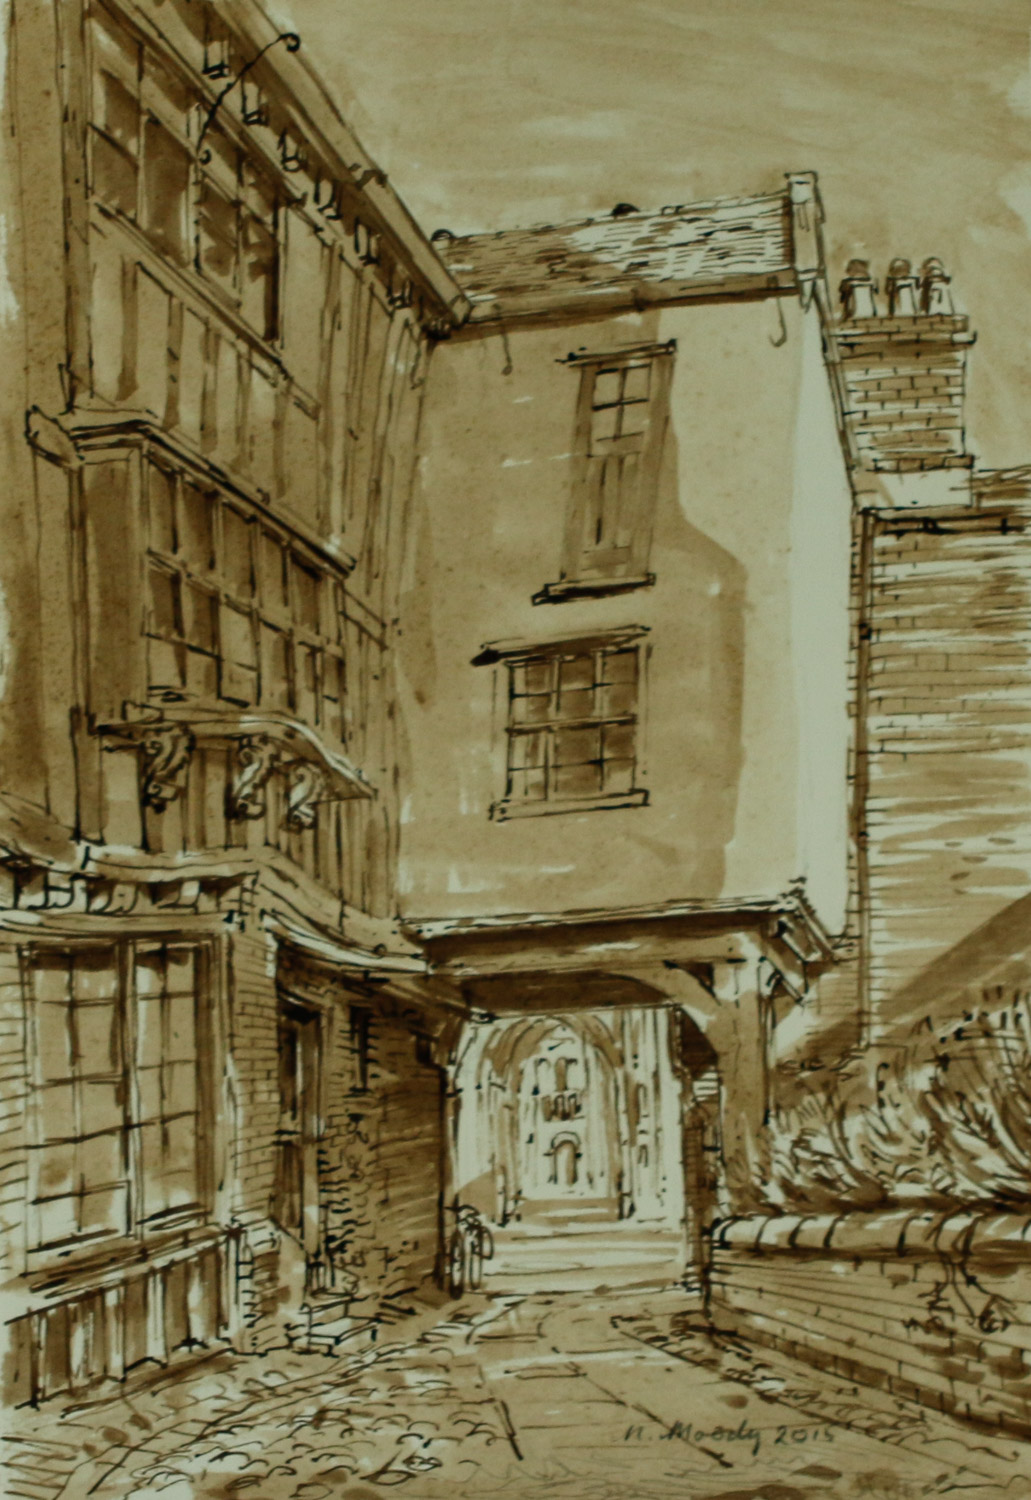 Artist Nigel Moody - Tombland Alley, £395 7x10 Pen, Brush & Ink at Paint Out Norwich 2015 photo